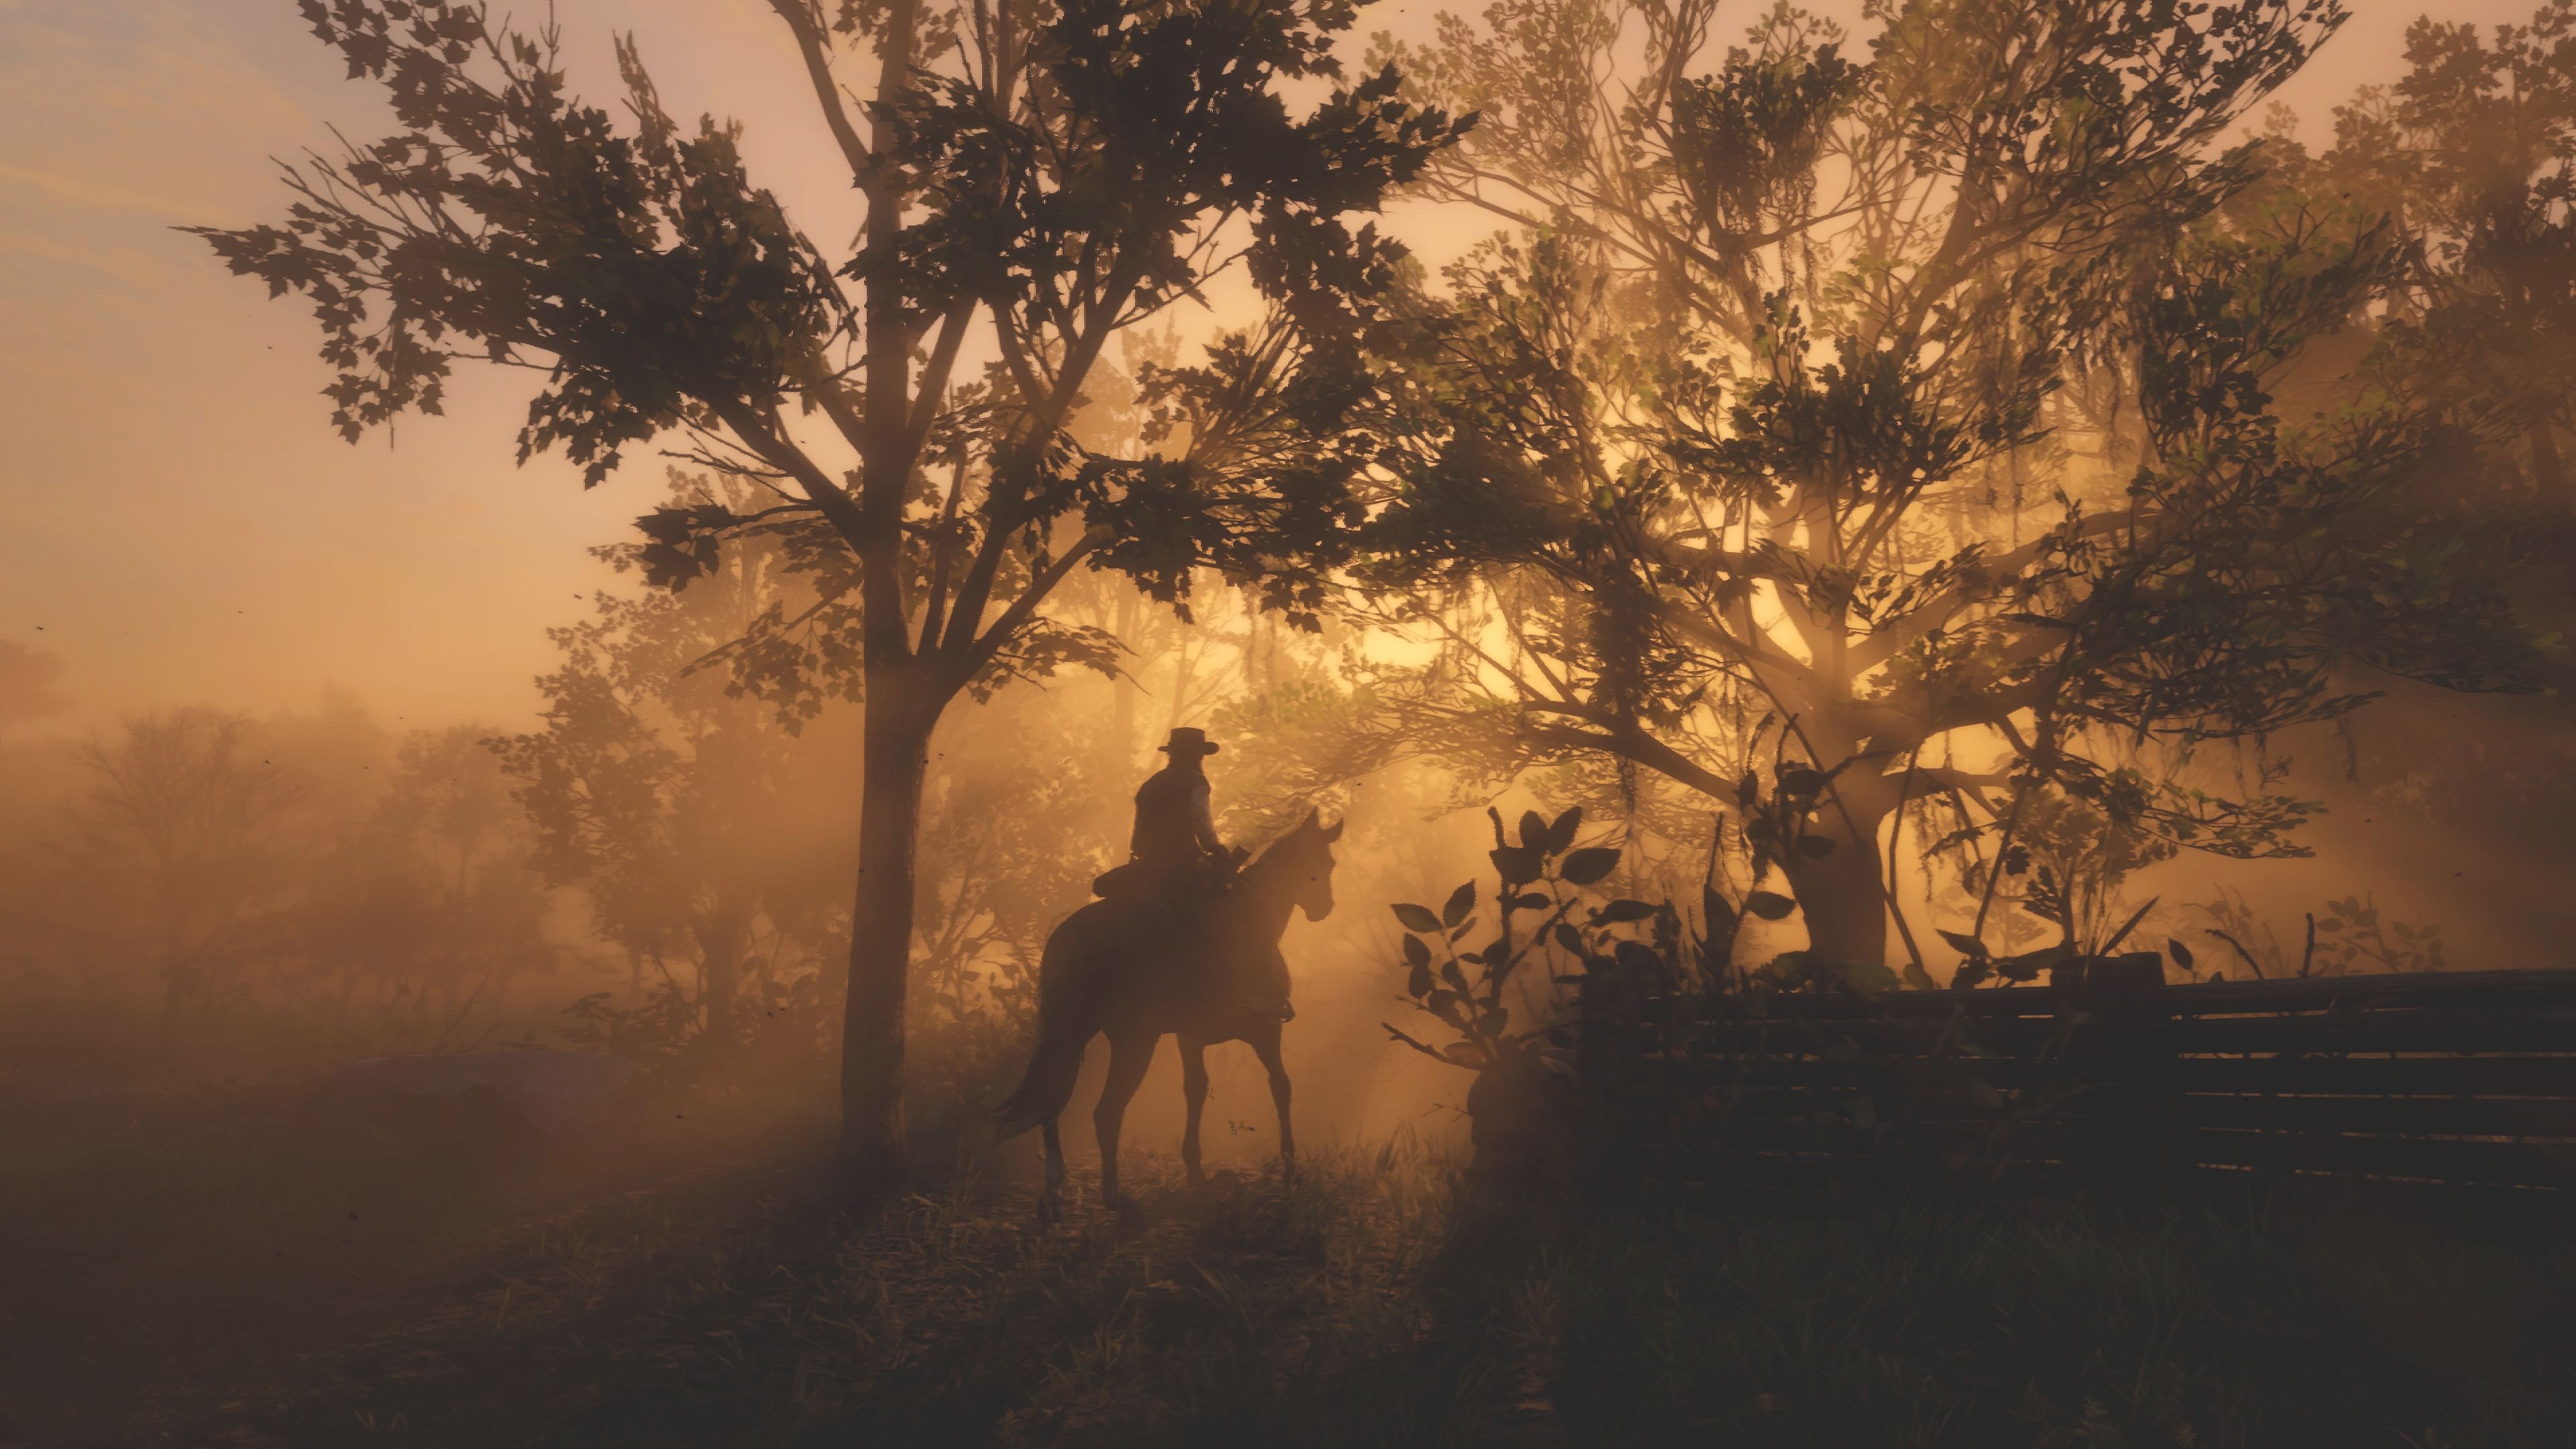 Red Dead Redemption 2 PC 4k Wallpapers - Wallpaper Cave